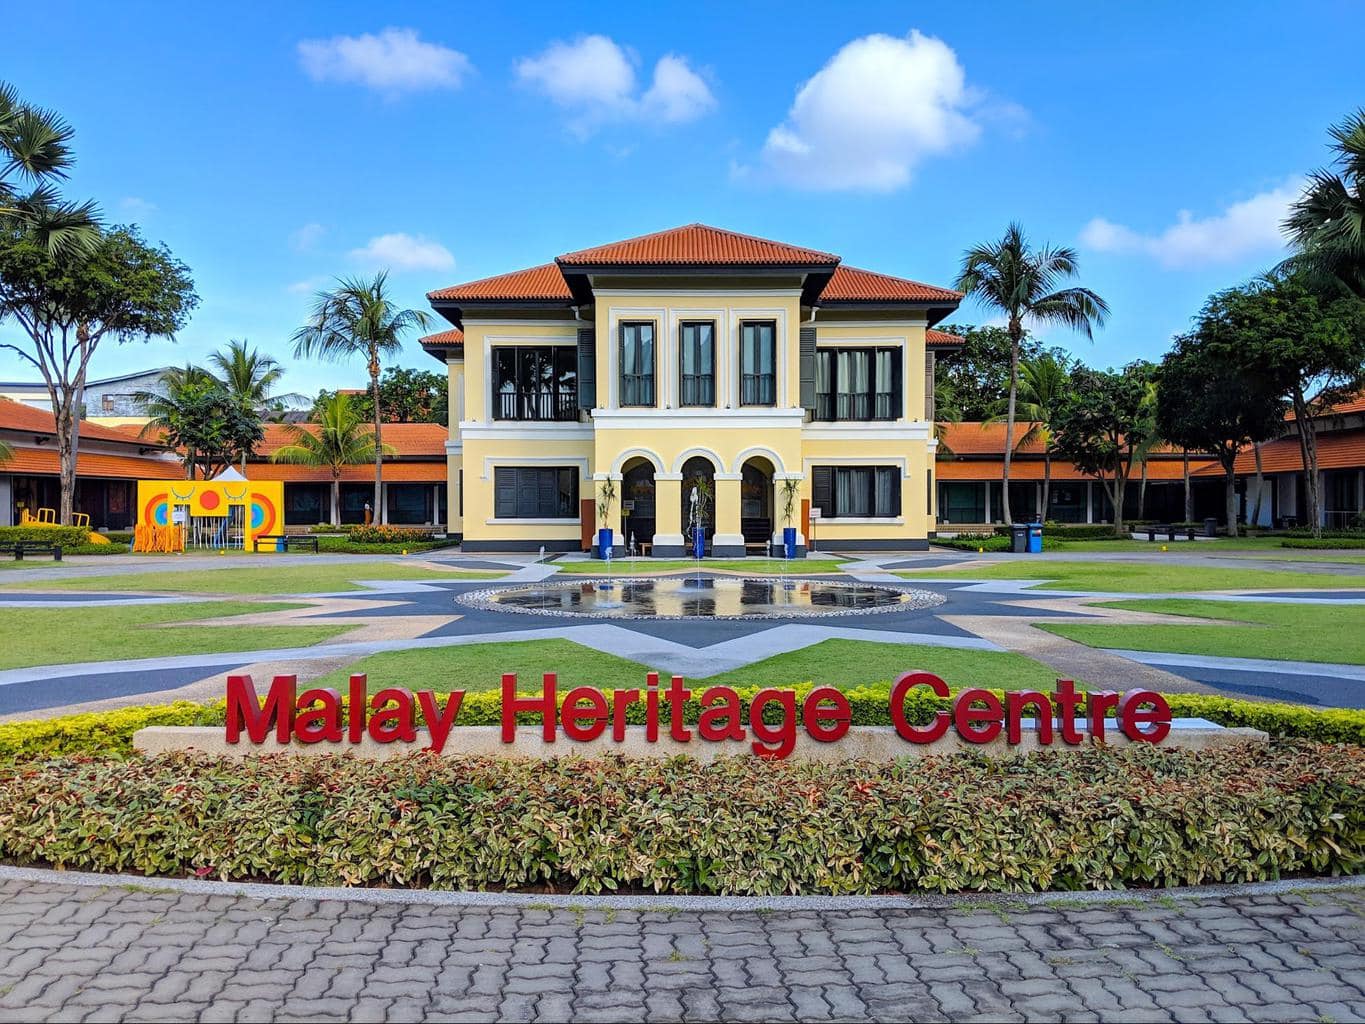 The Malay Heritage Museum